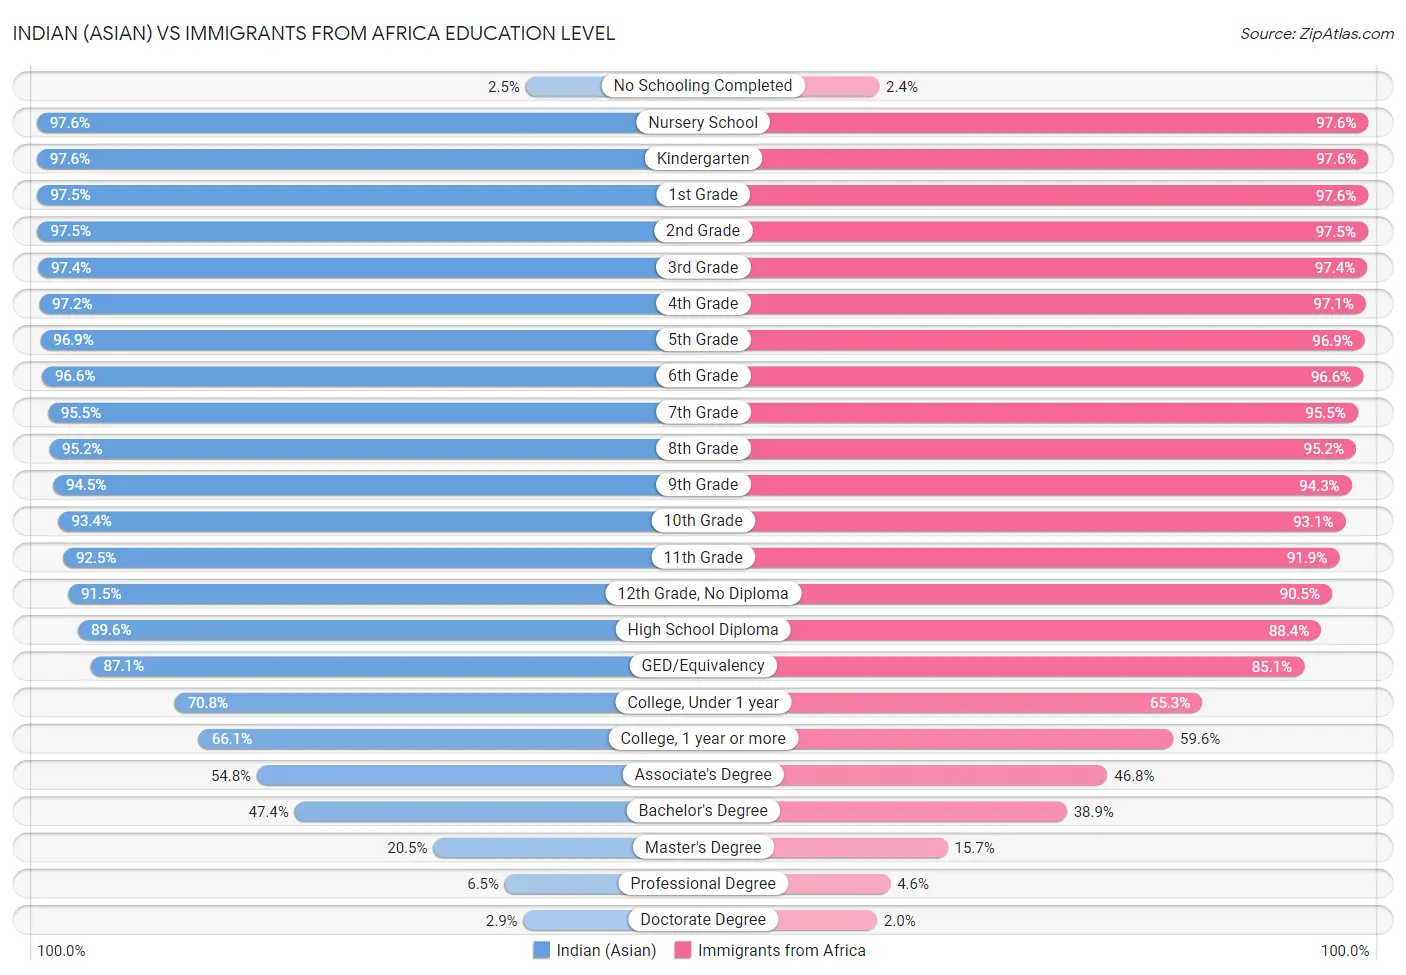 Indian (Asian) vs Immigrants from Africa Education Level